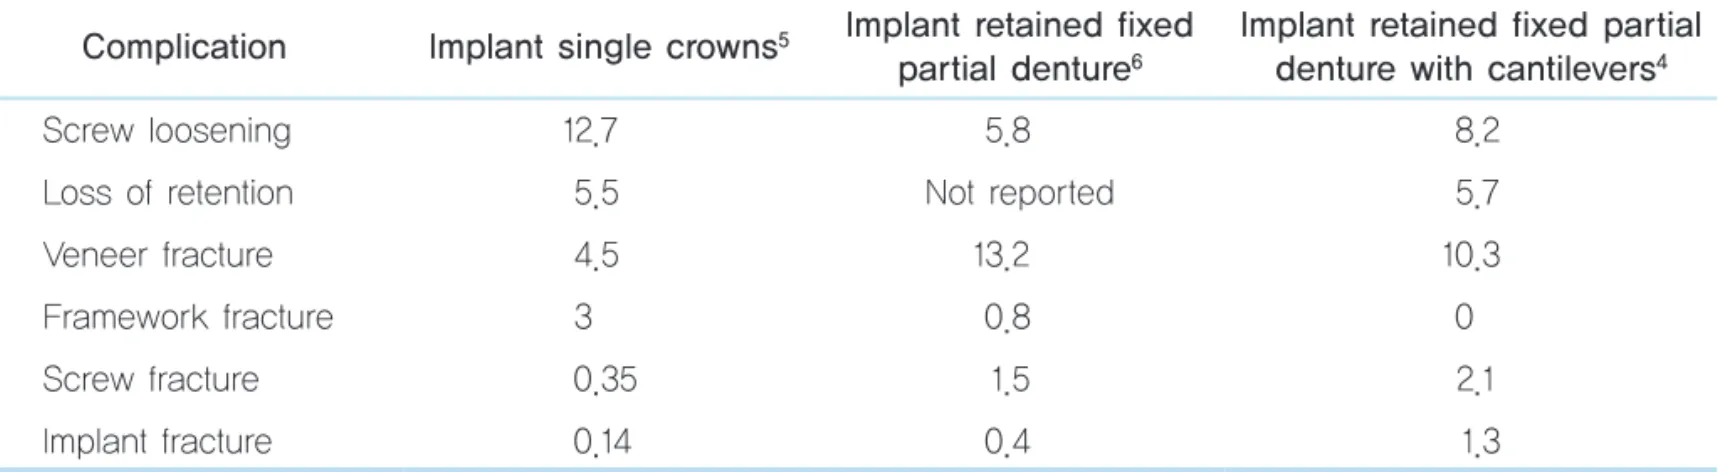 Table 1.  Mechanical complication of implant retained fixed prosthesis (%) Complication Implant single crowns 5 Implant retained fixed 